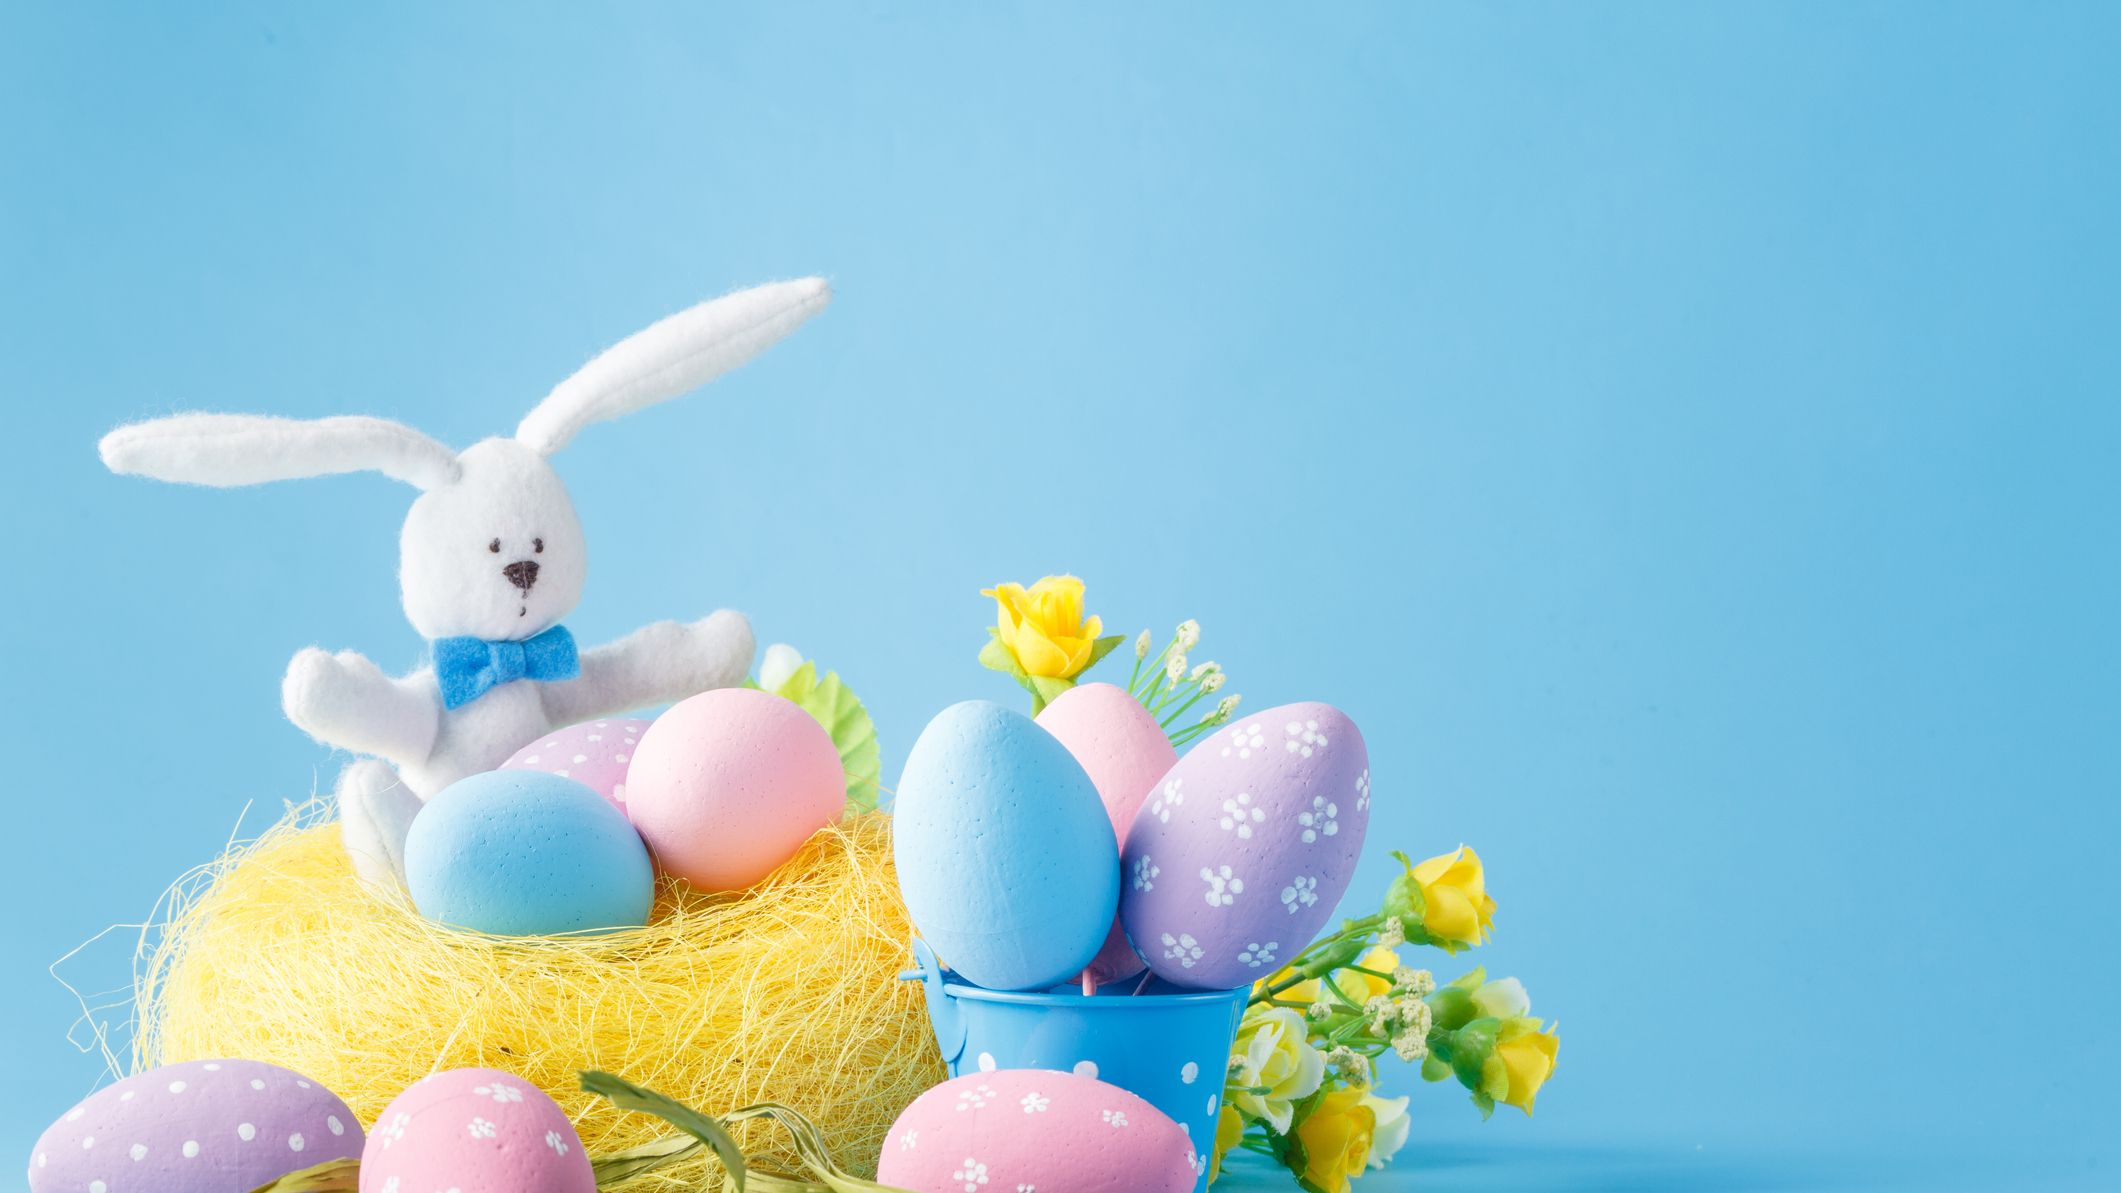 100 Best Easter Puns - Funny Bunny Puns and Jokes for Easter 2023